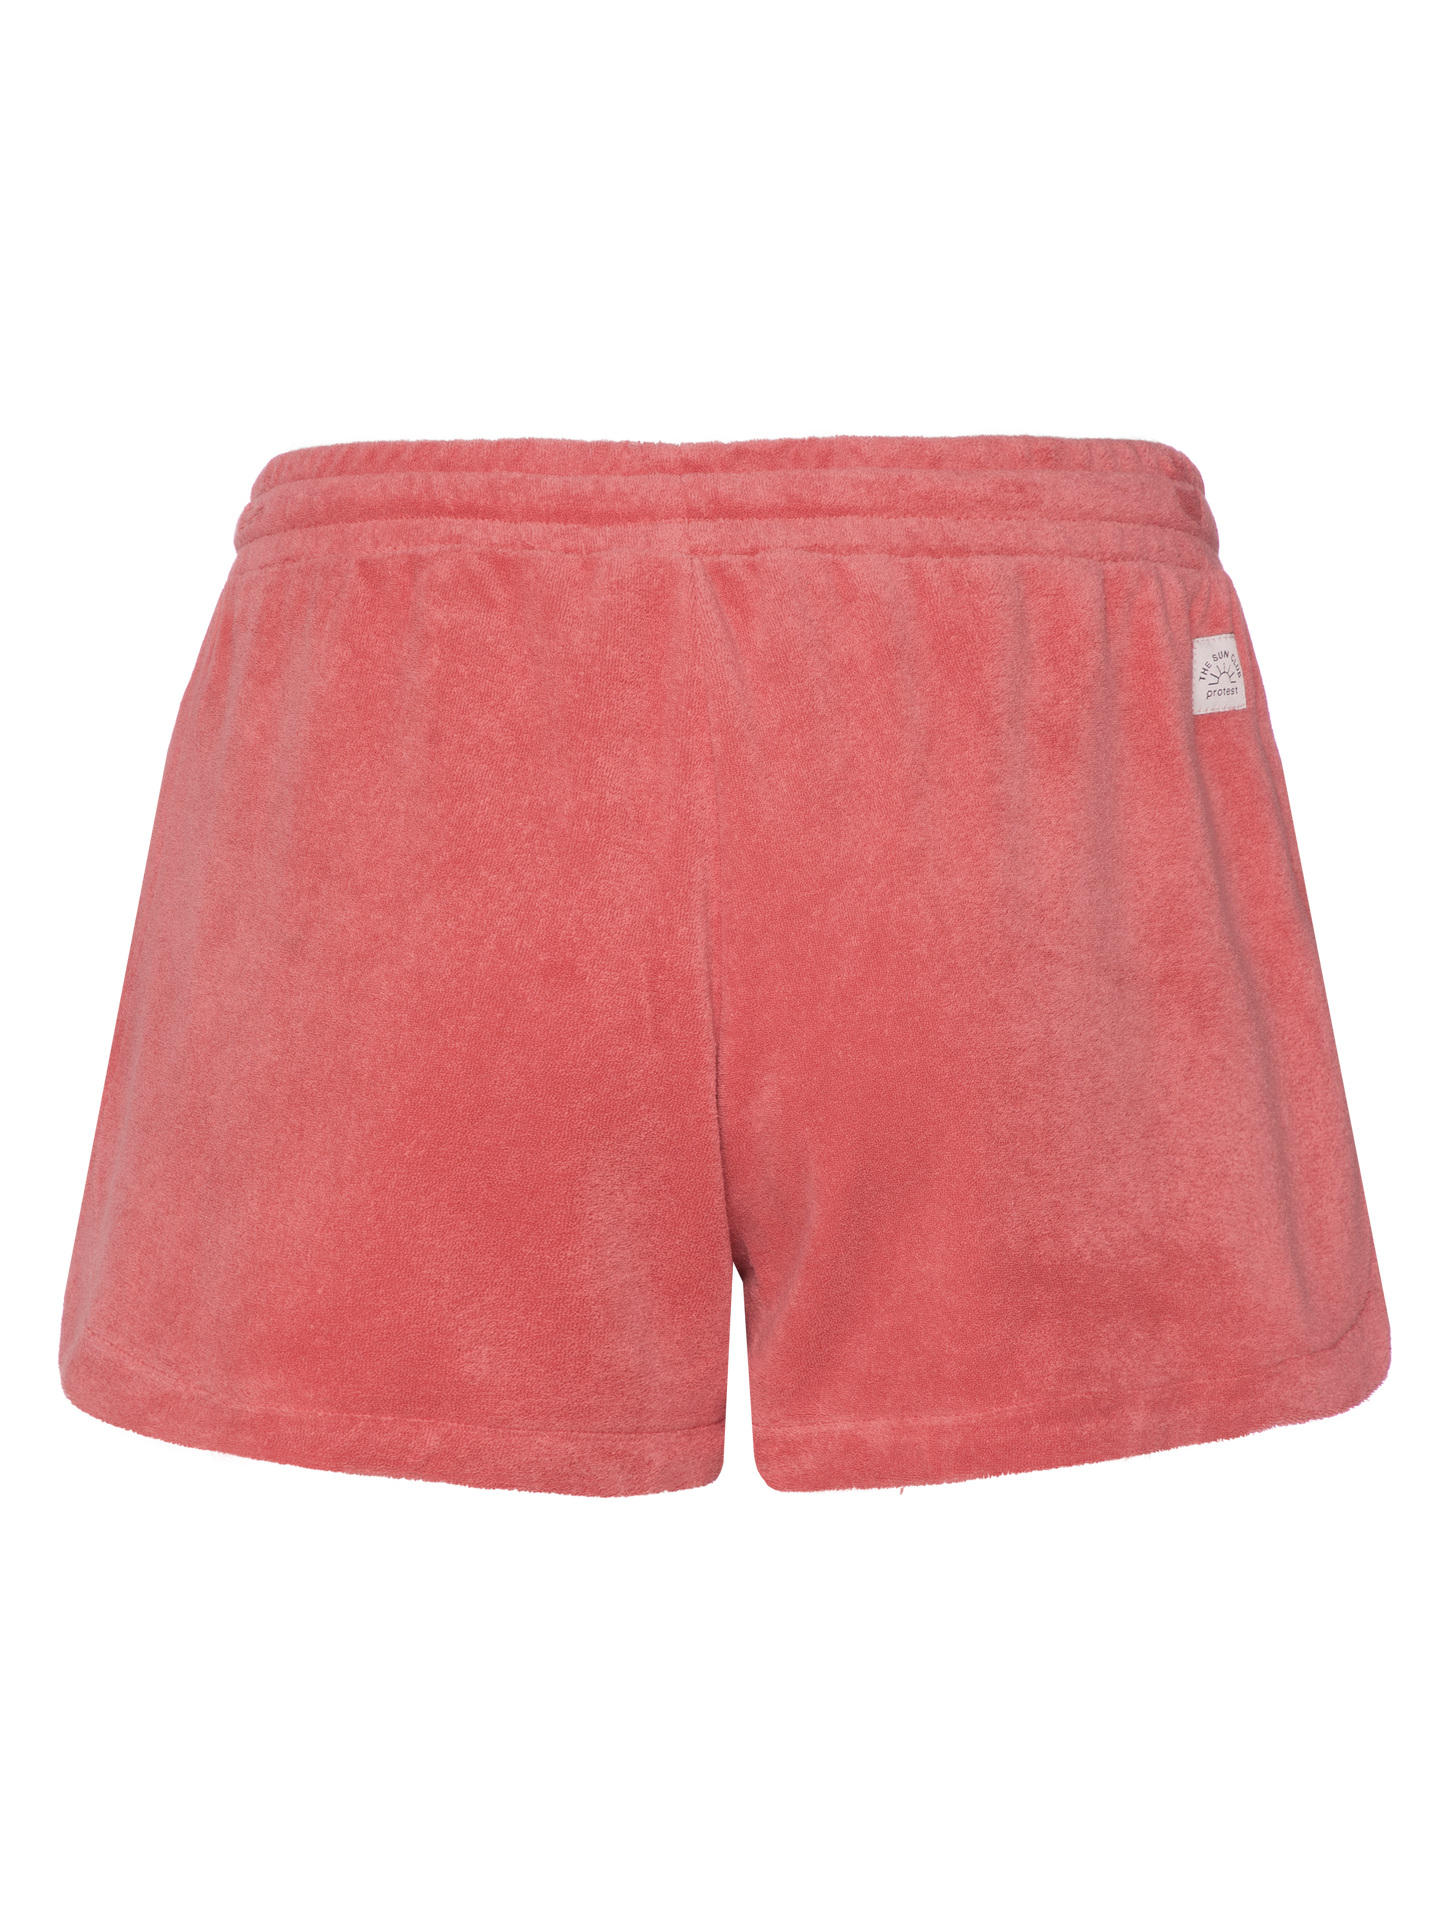 Protest Kabin Shorts in Cottage Rust Pink